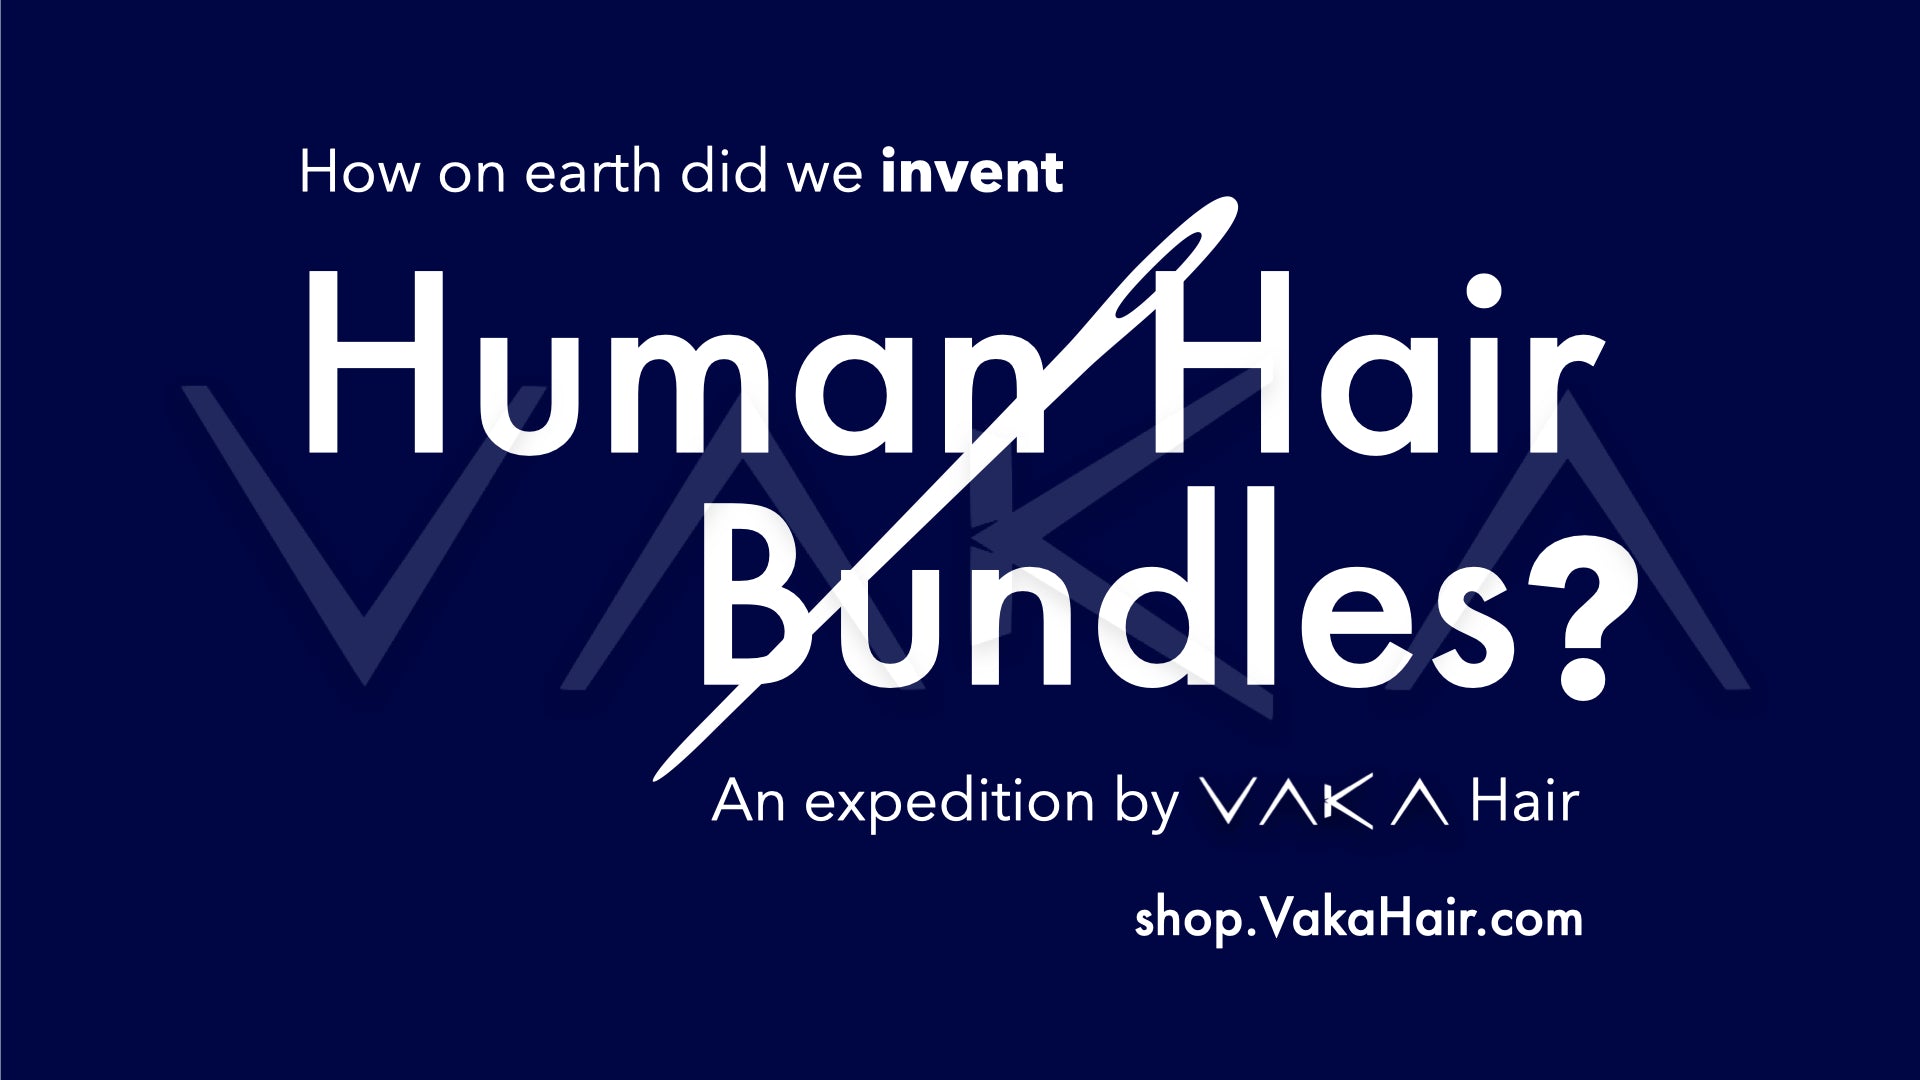 Evolution of human hair bundles the #1 choice of hair extensions